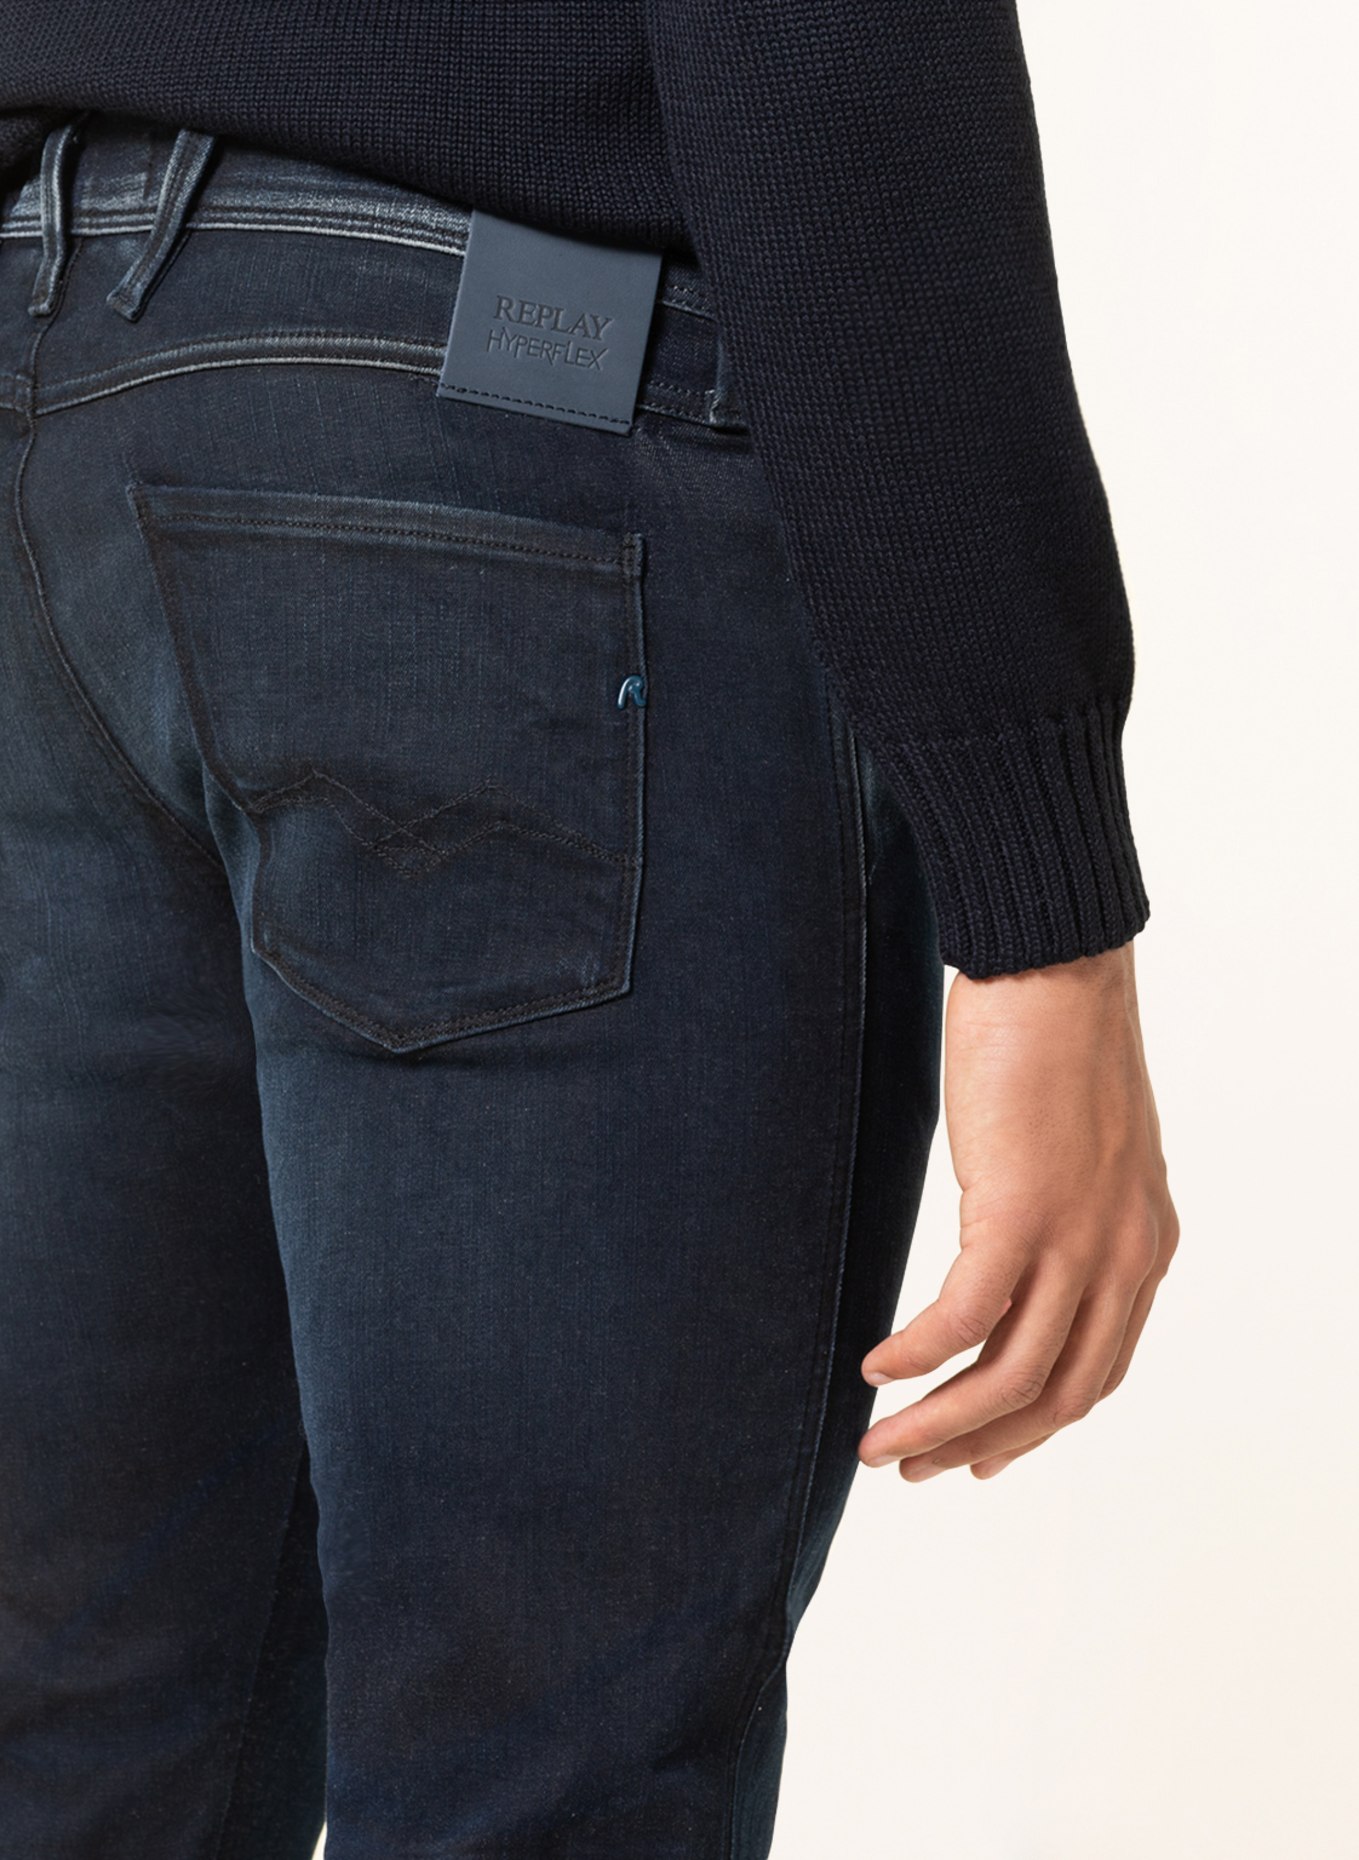 REPLAY Jeans ANBASS RE-USEDANBASS HYPERFLEX RE-USED slim fit, Color: 007 DARK BLUE (Image 5)